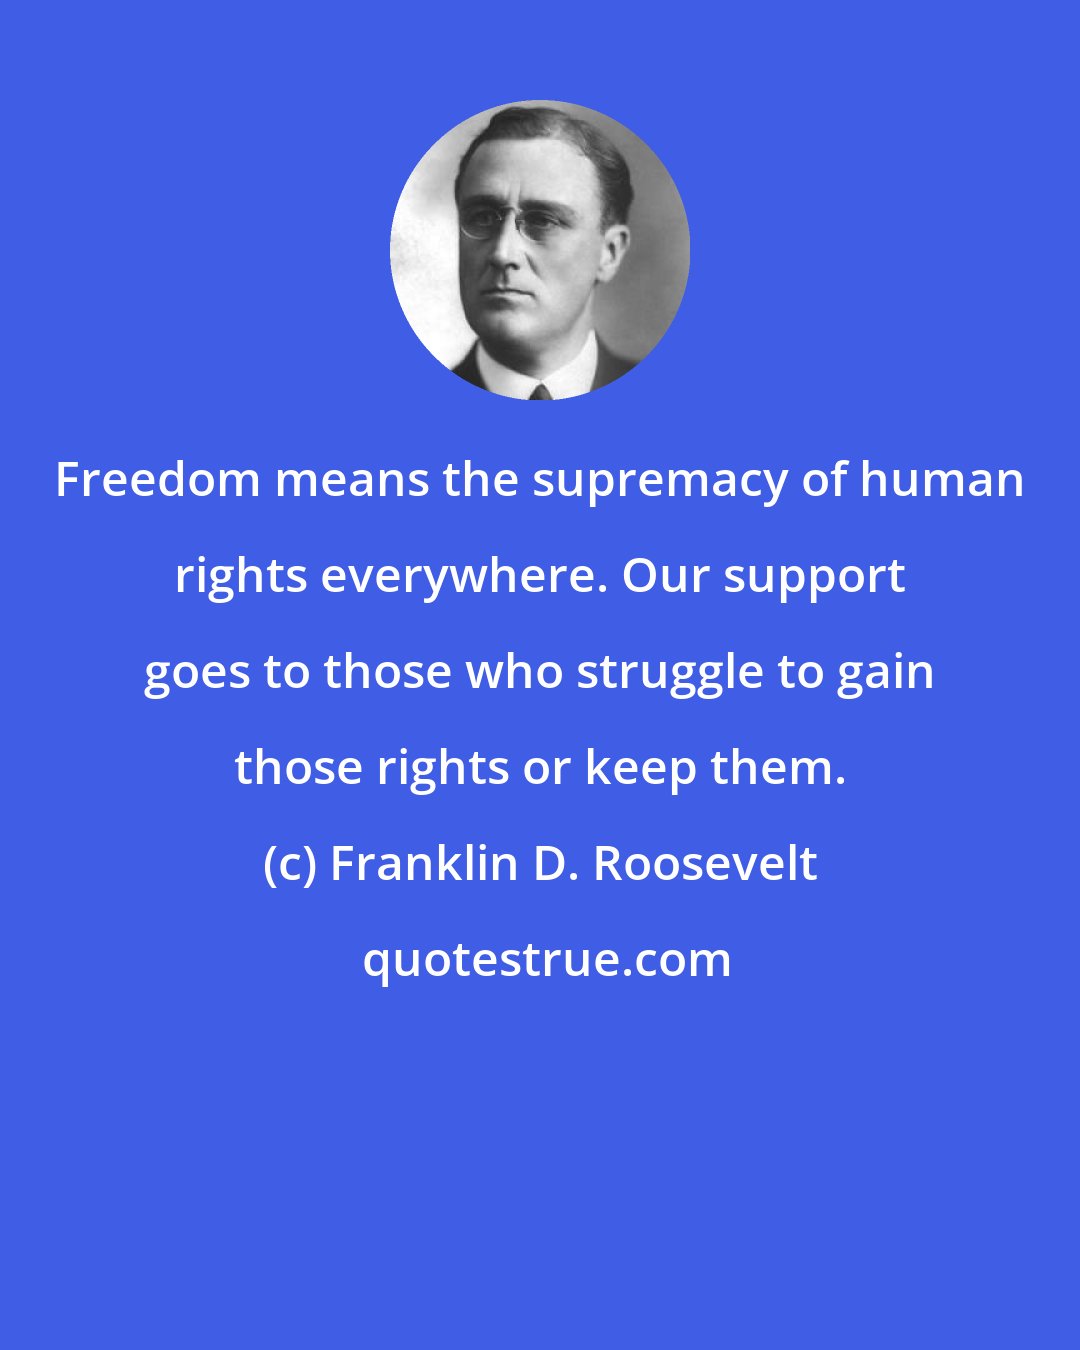 Franklin D. Roosevelt: Freedom means the supremacy of human rights everywhere. Our support goes to those who struggle to gain those rights or keep them.